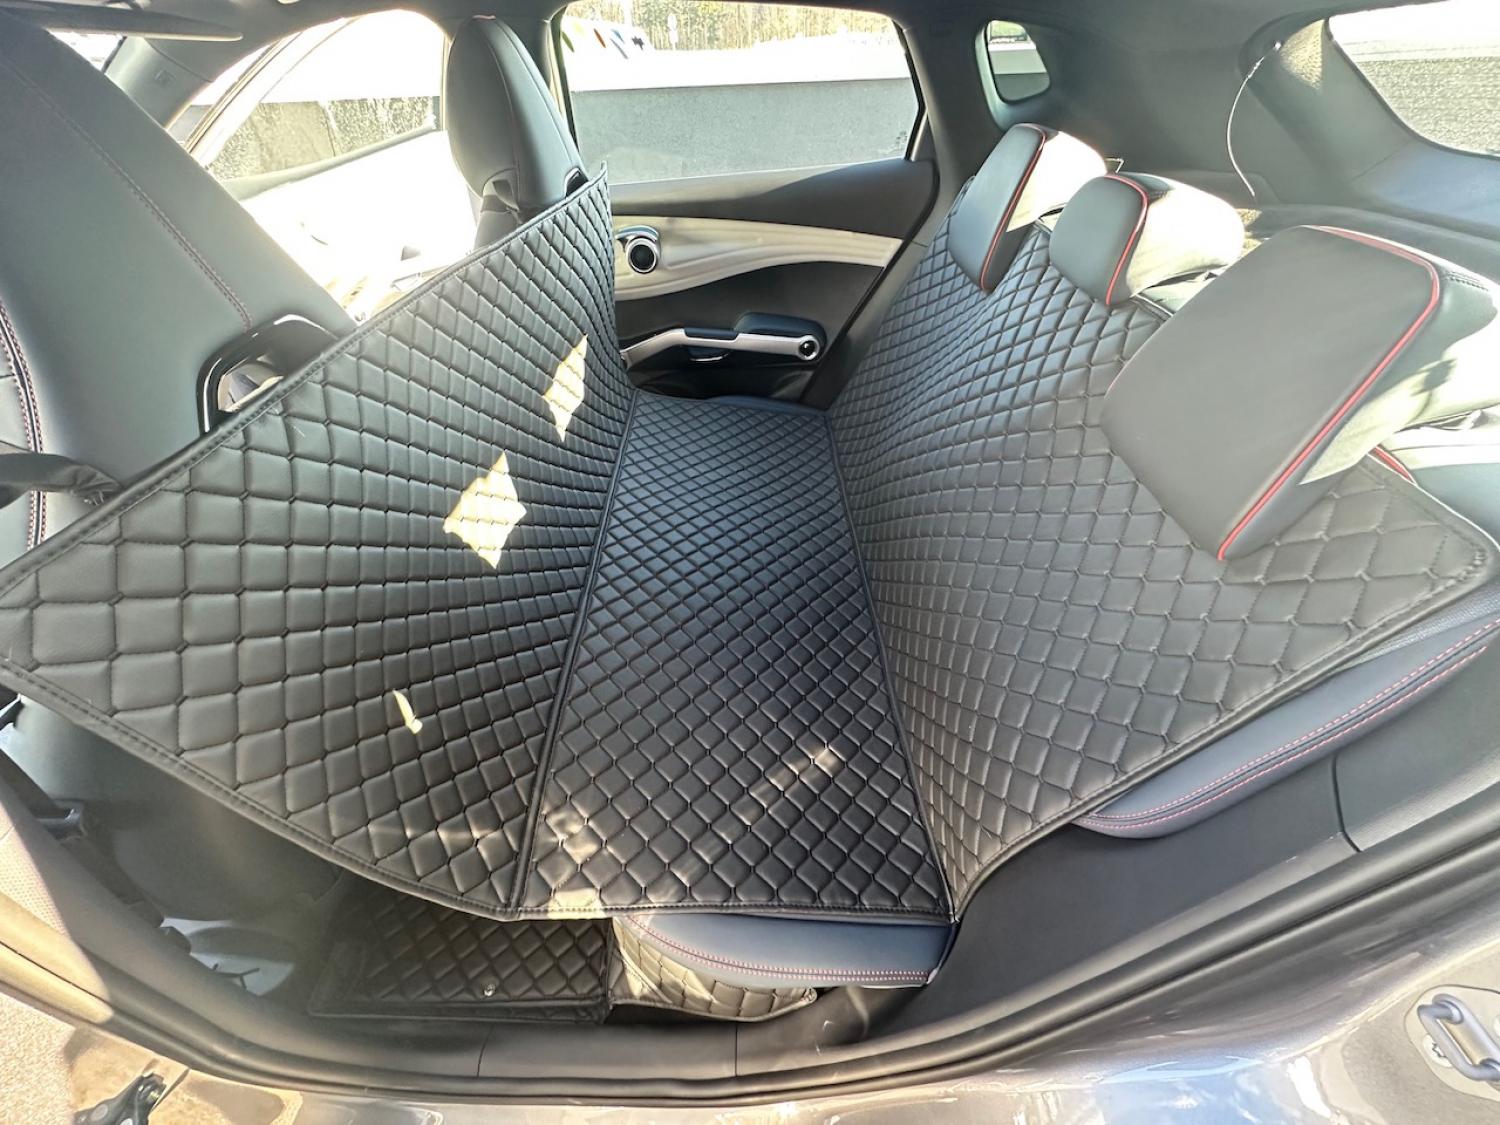 CARSTYLER® Back Seat Cover Geeignet Für Audi Q4 e-tron Tiefer Boden